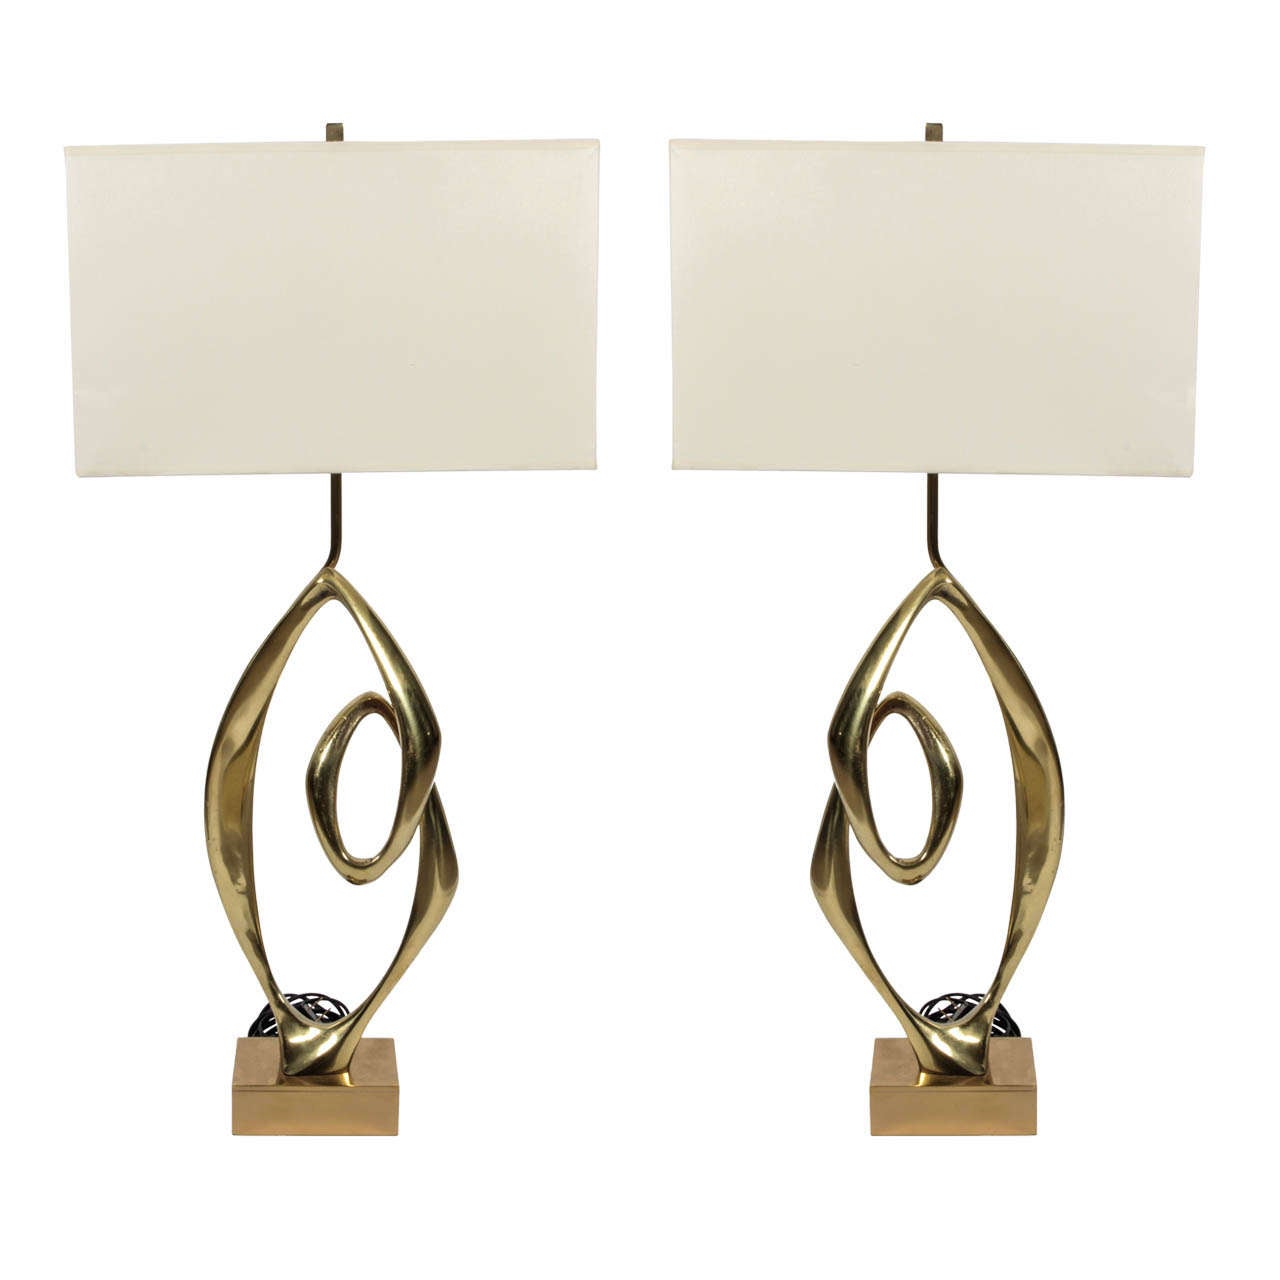 Pair of Lamps by Willy Daro